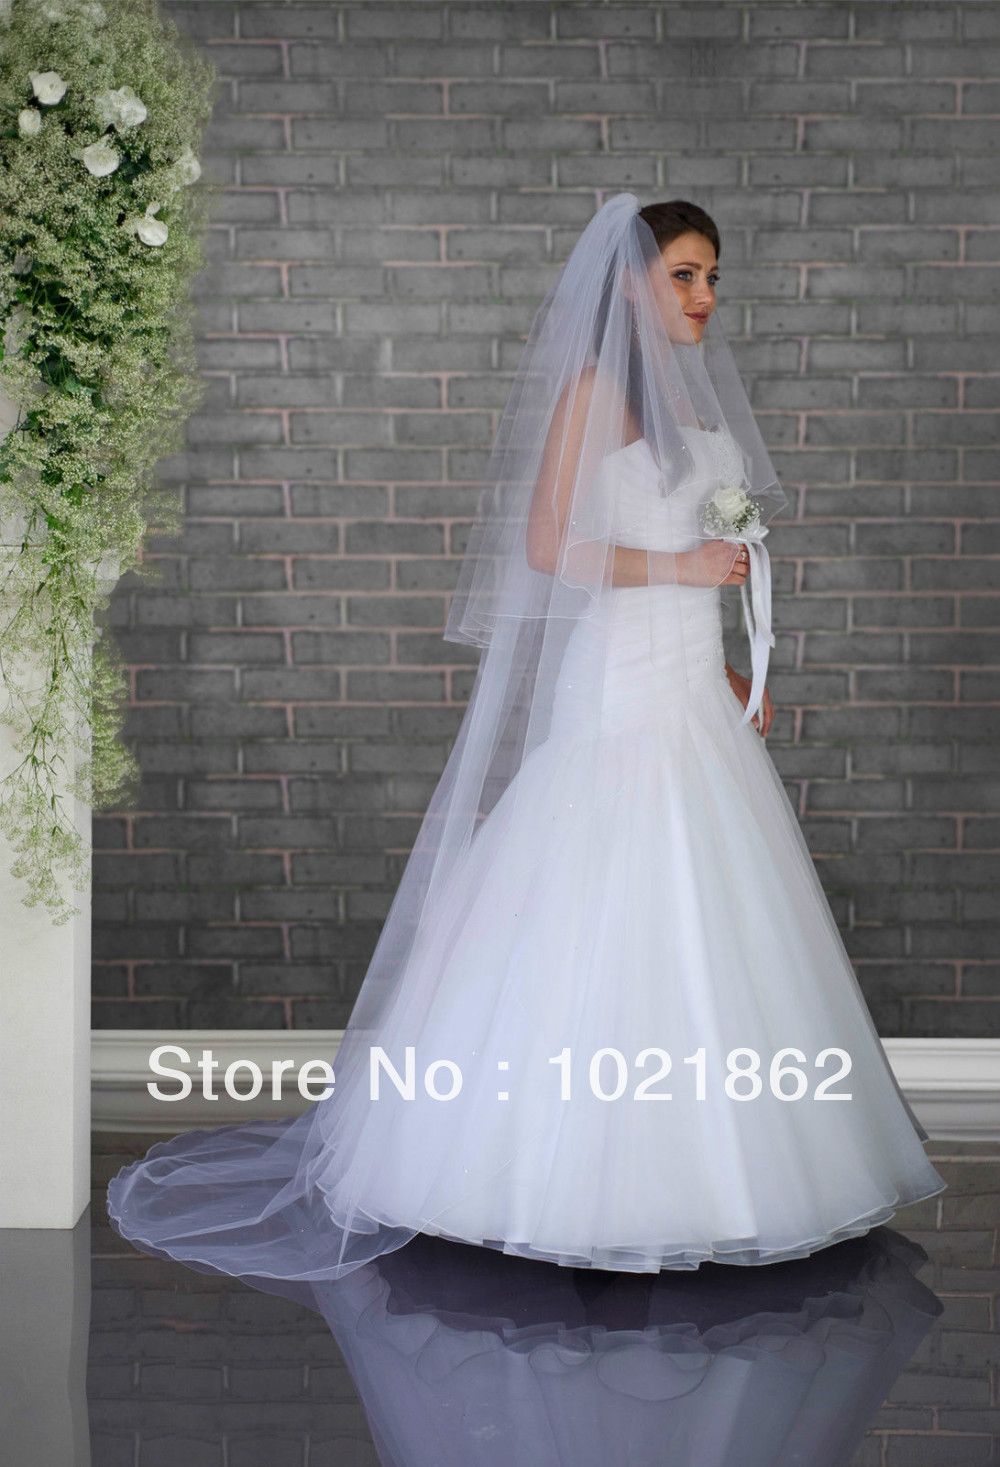 Custom Made White / Ivory Cathedral Length Wedding Veil Two Tier Long Wedding Dresses Bridal Veils Hot Sale